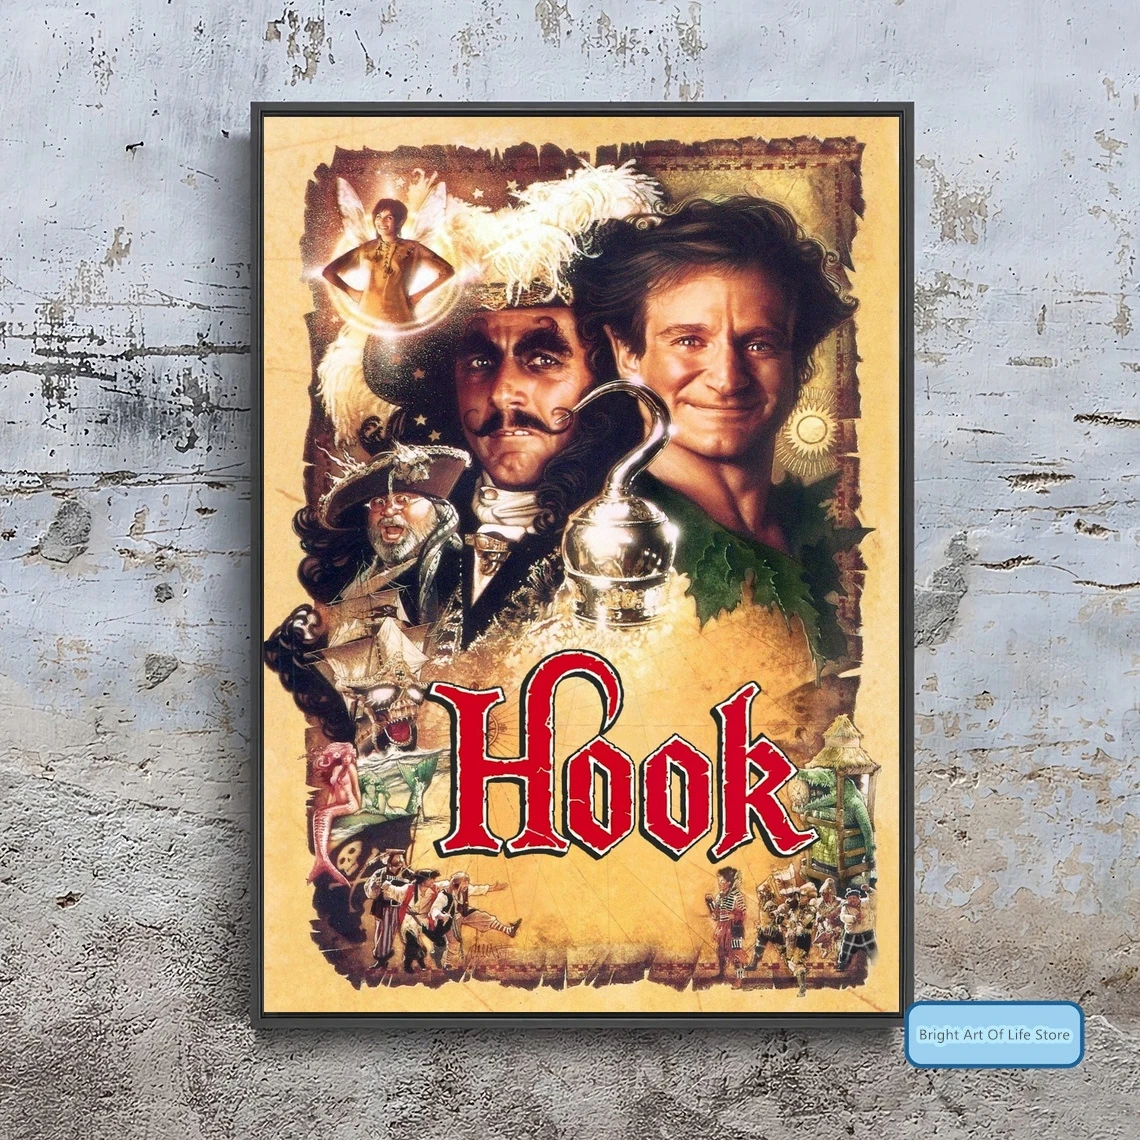 Hook (1991) Classic Movie Poster Cover Photo Print Canvas Wall Art